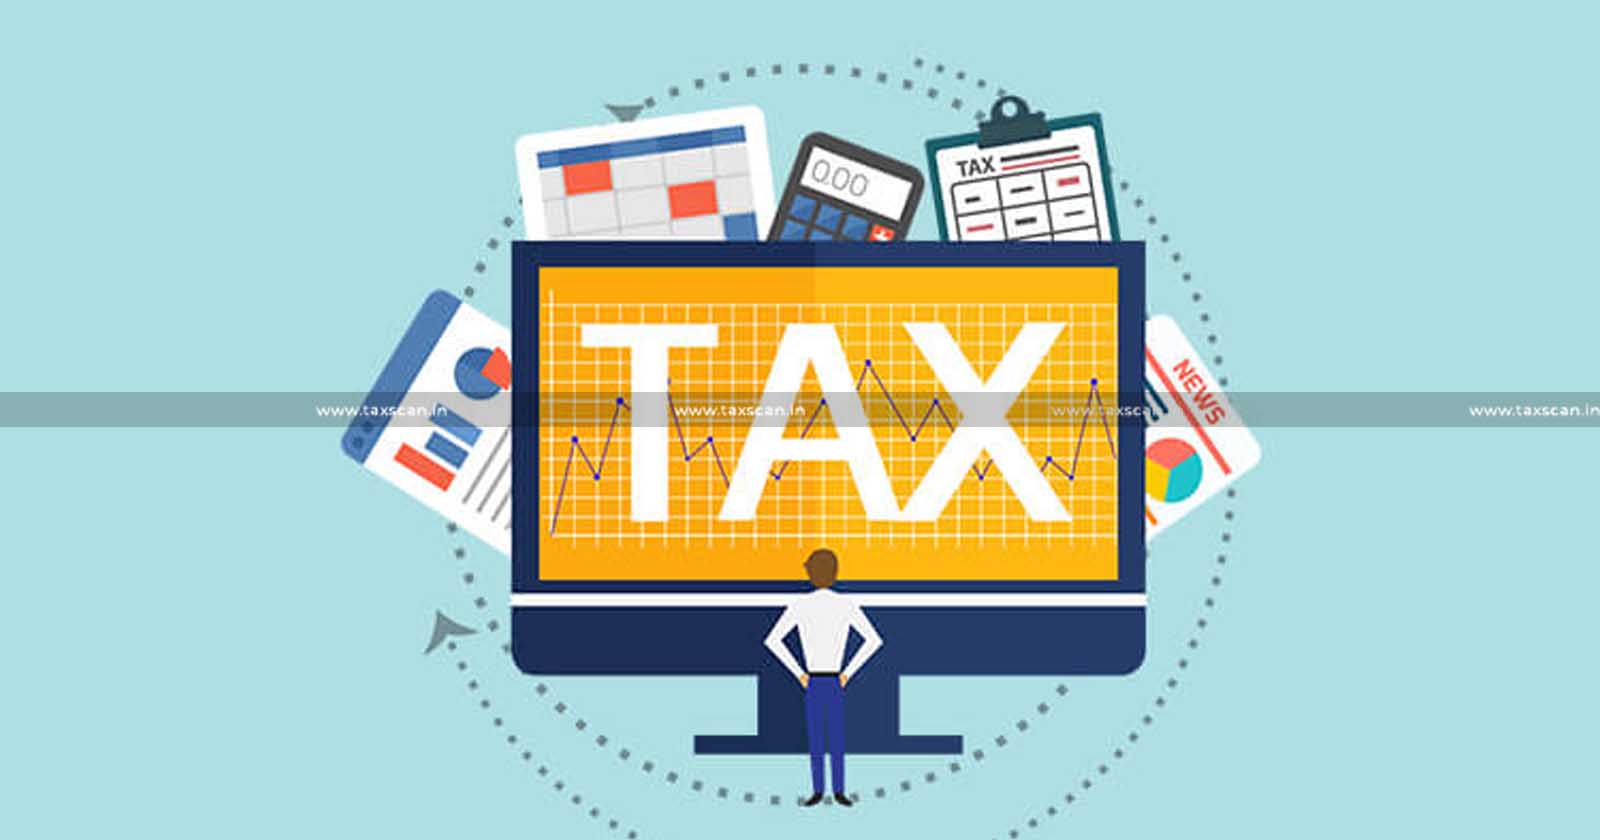 AO Wrongly Raises Demand on Dividend Distribution Tax - AO Wrongly Raises Demand - Proof of Payment - ITAT Directs Readjudication - taxscan